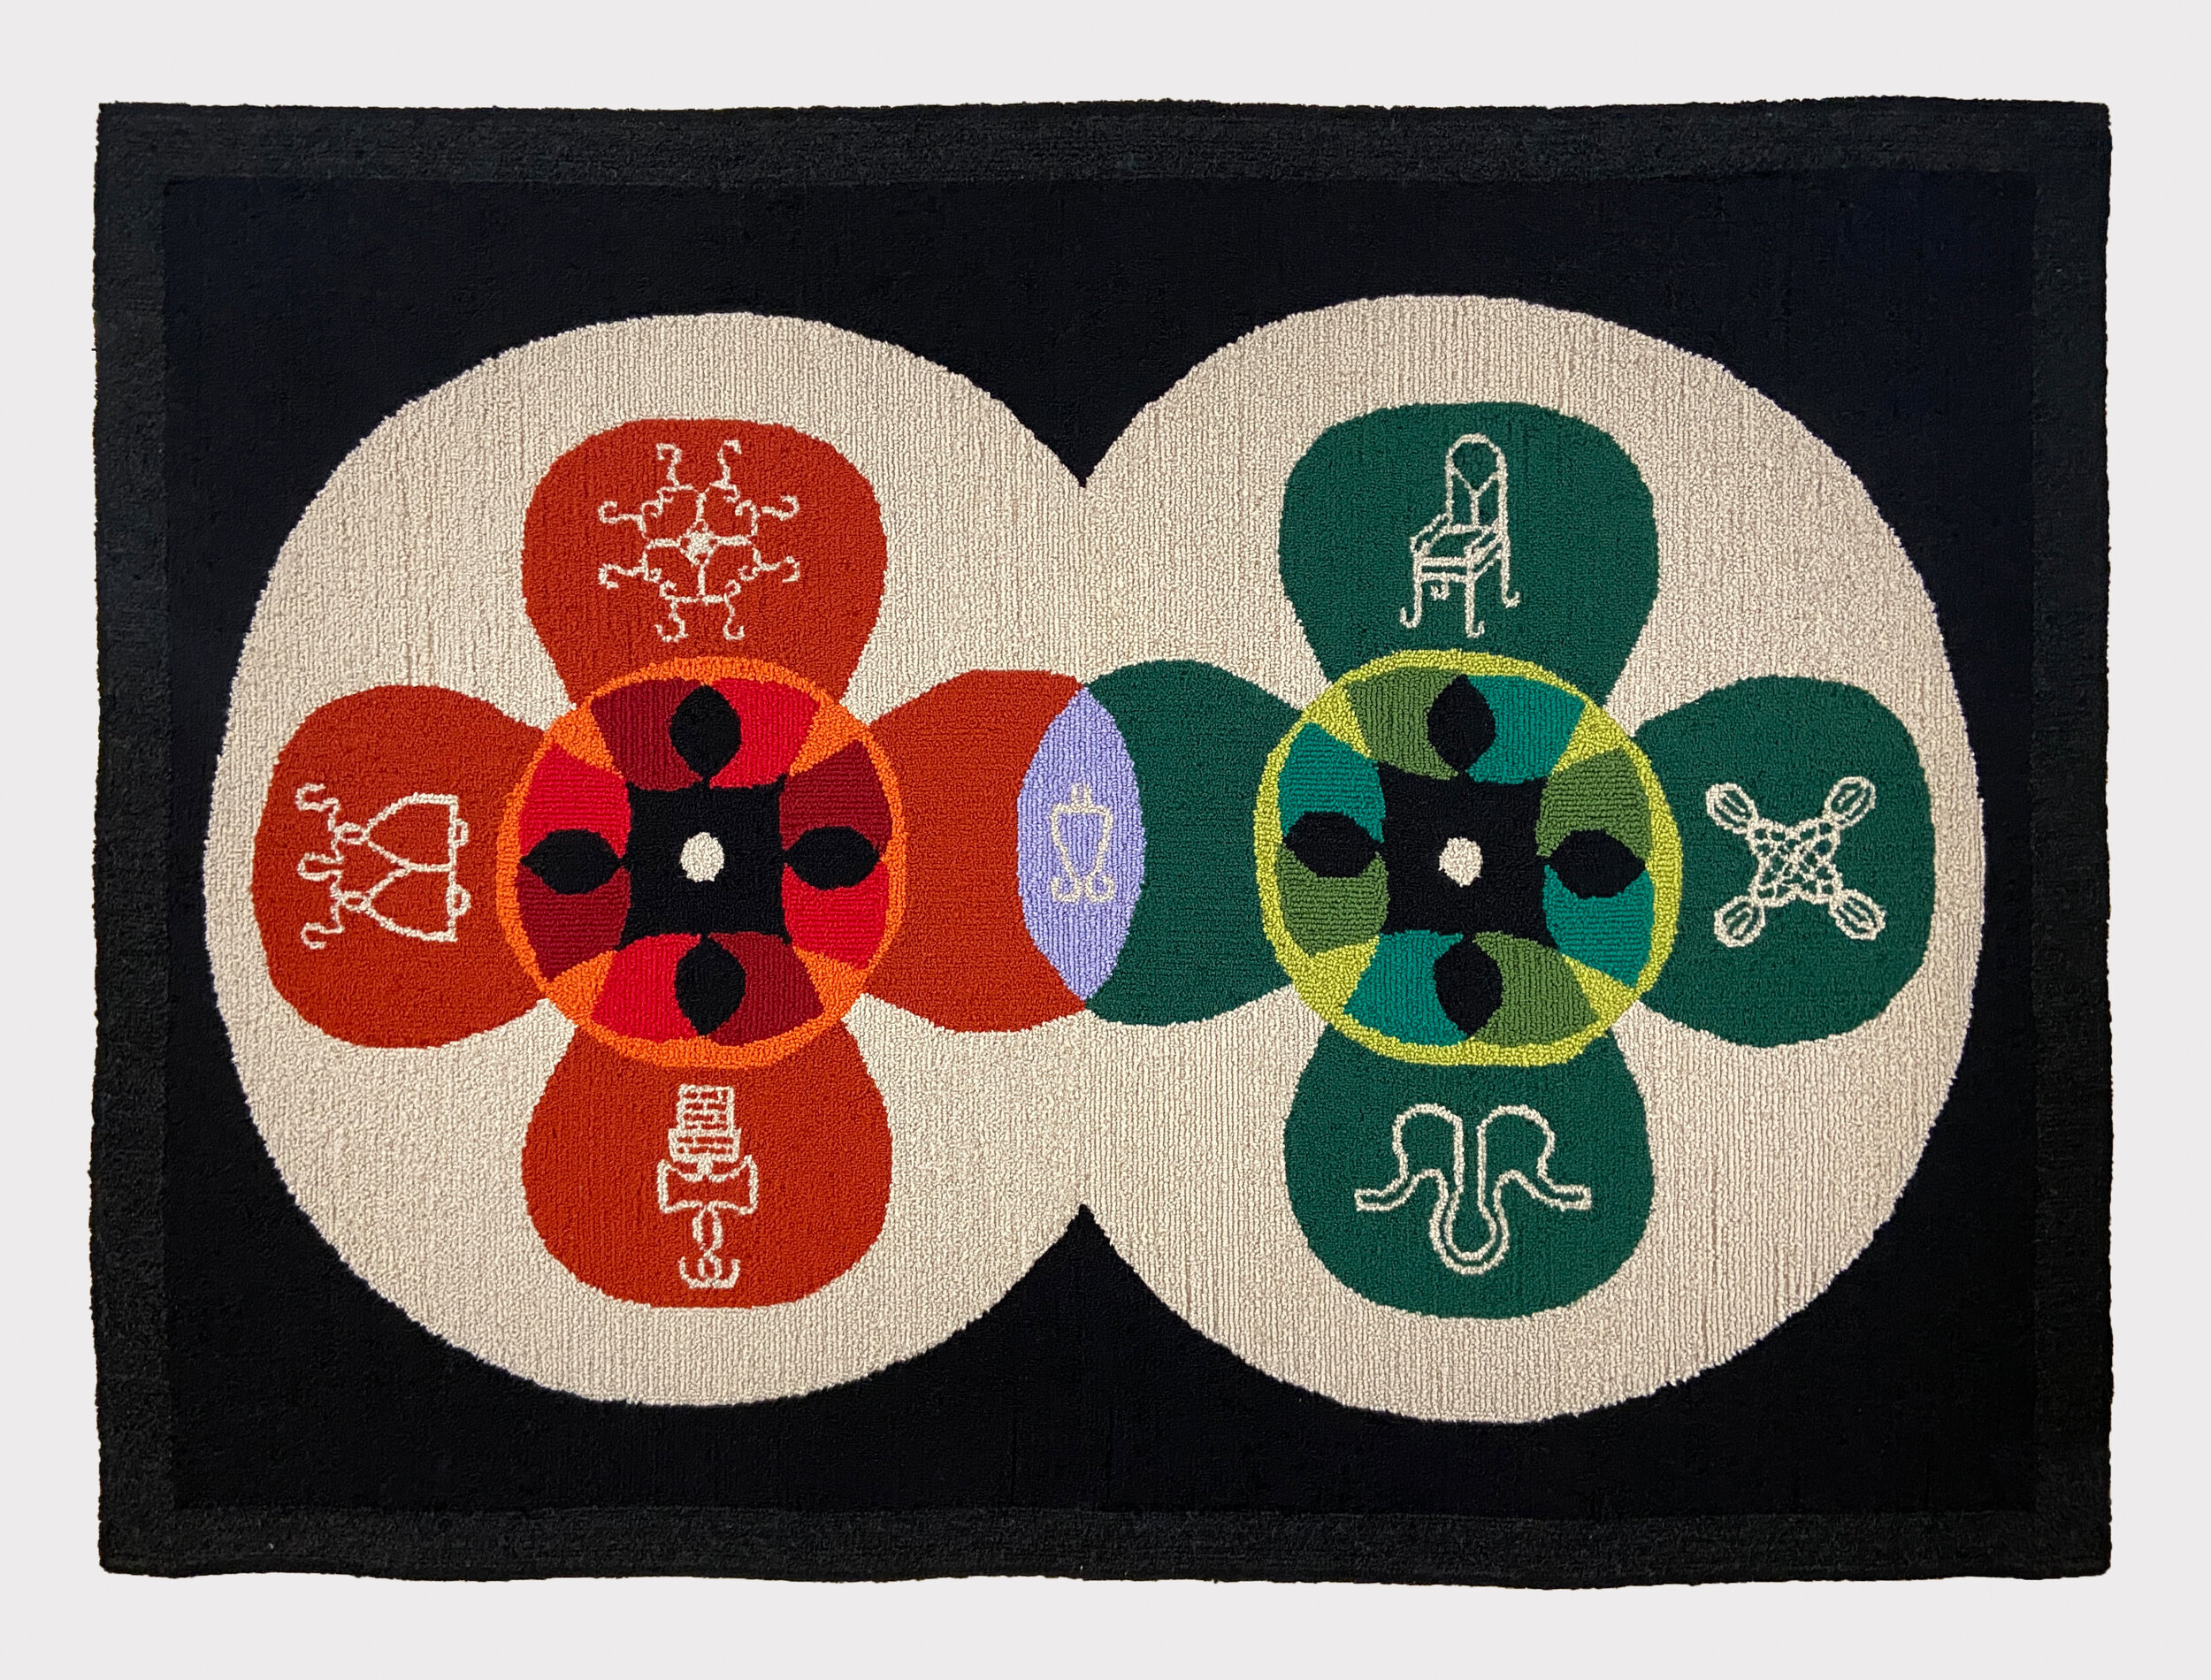   Engine Room,  hand hooked and tufted wool rug, 42.5 x 57.5 inches, 2020 